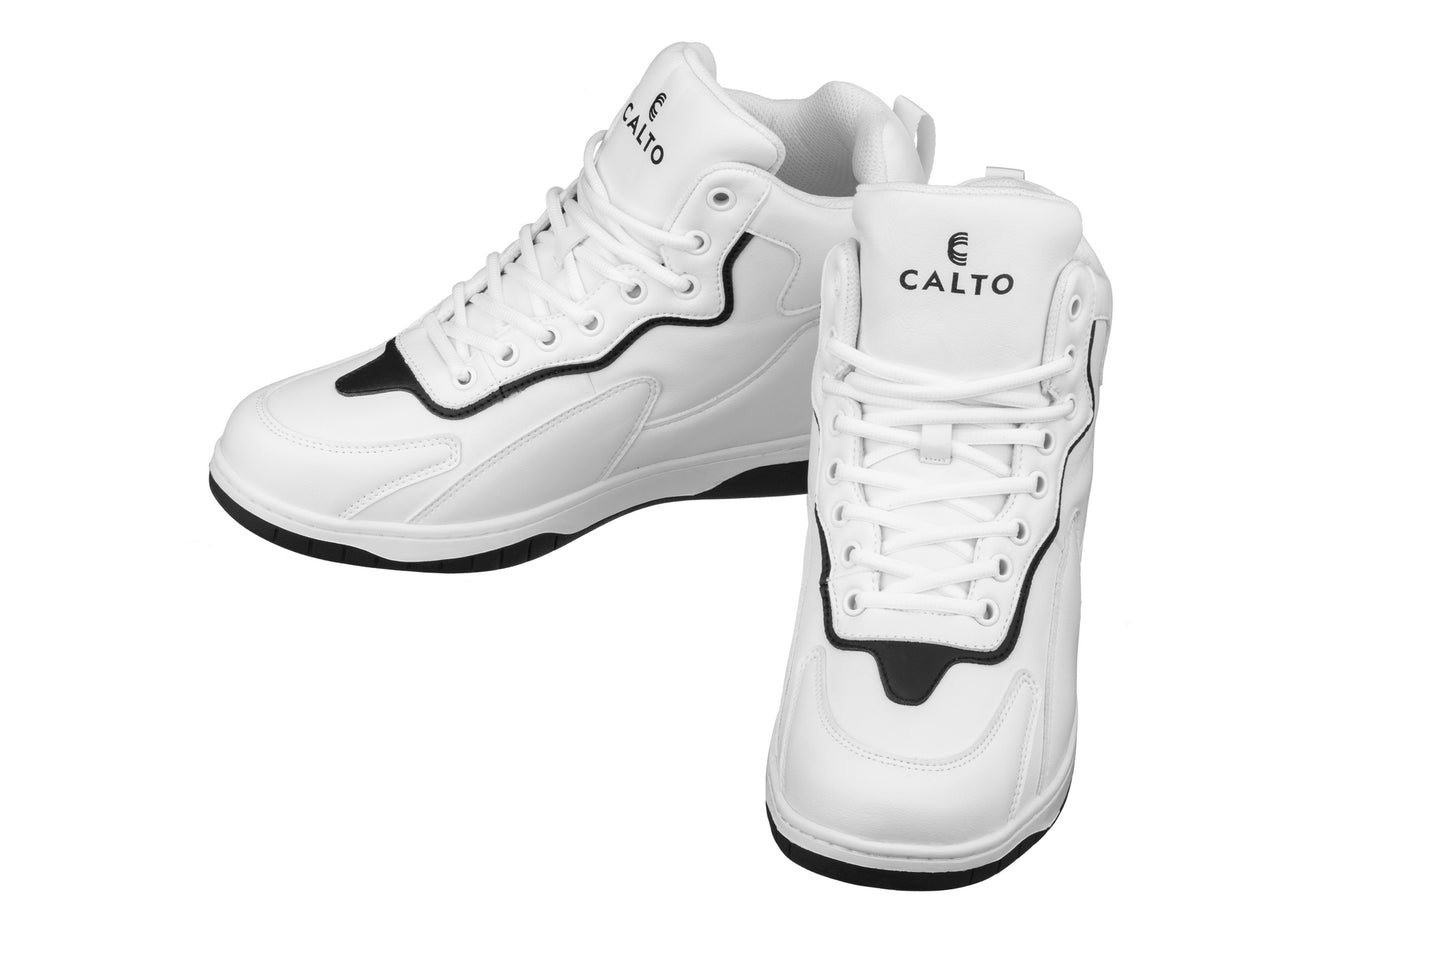 Elevator shoes height increase CALTO - S3269 - 3.2 Inches Taller (White/Black) - Sneakers